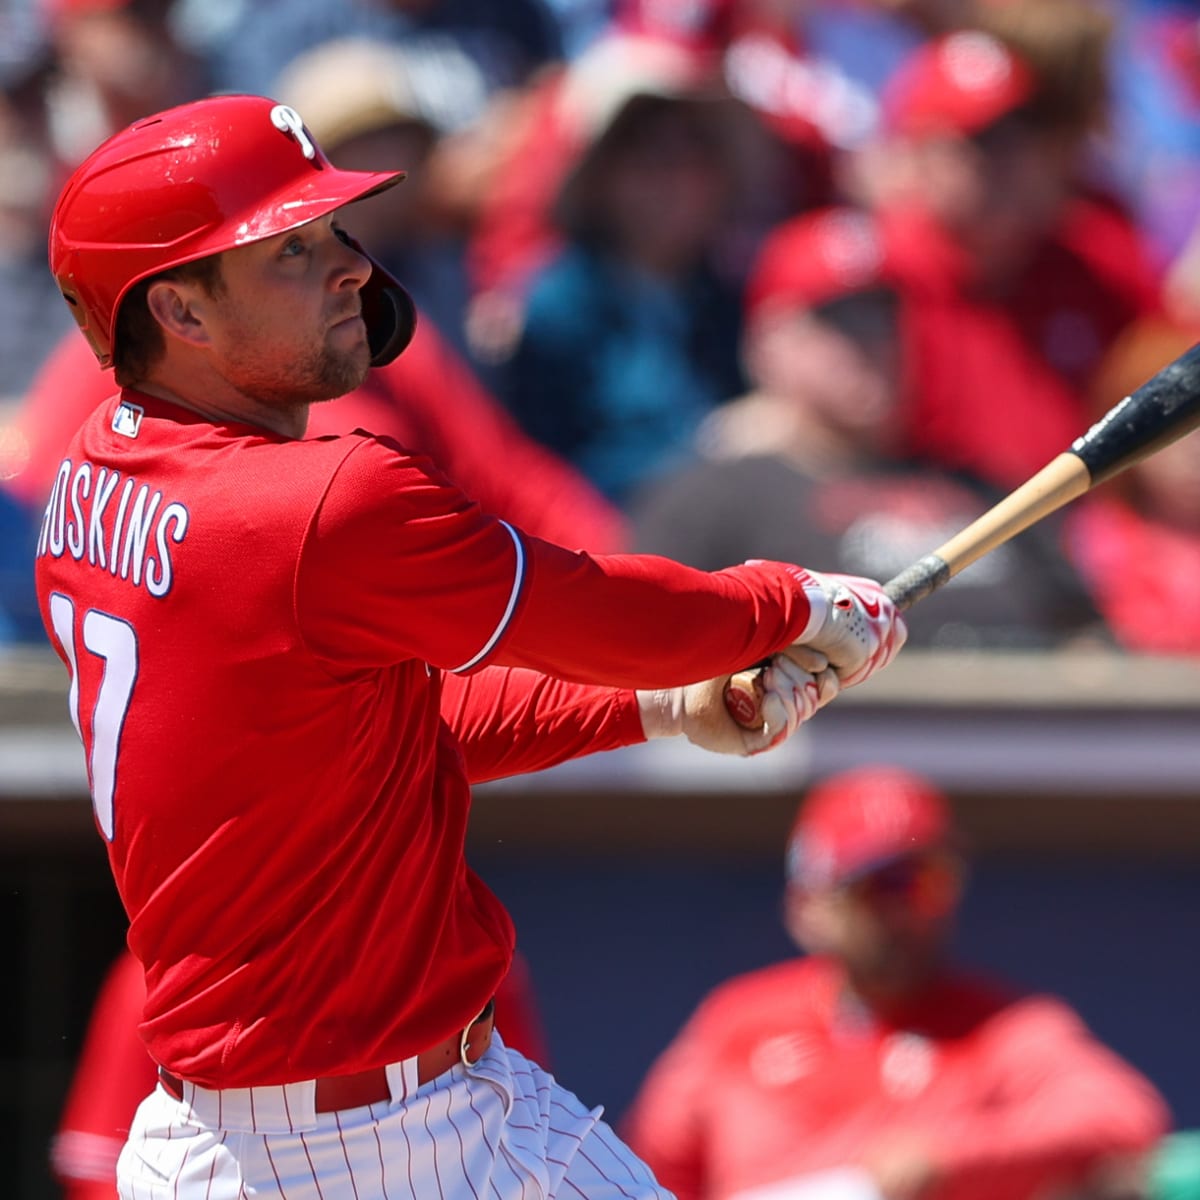 Rhys Hoskins Injured, Carted Off Field During Spring Training Game